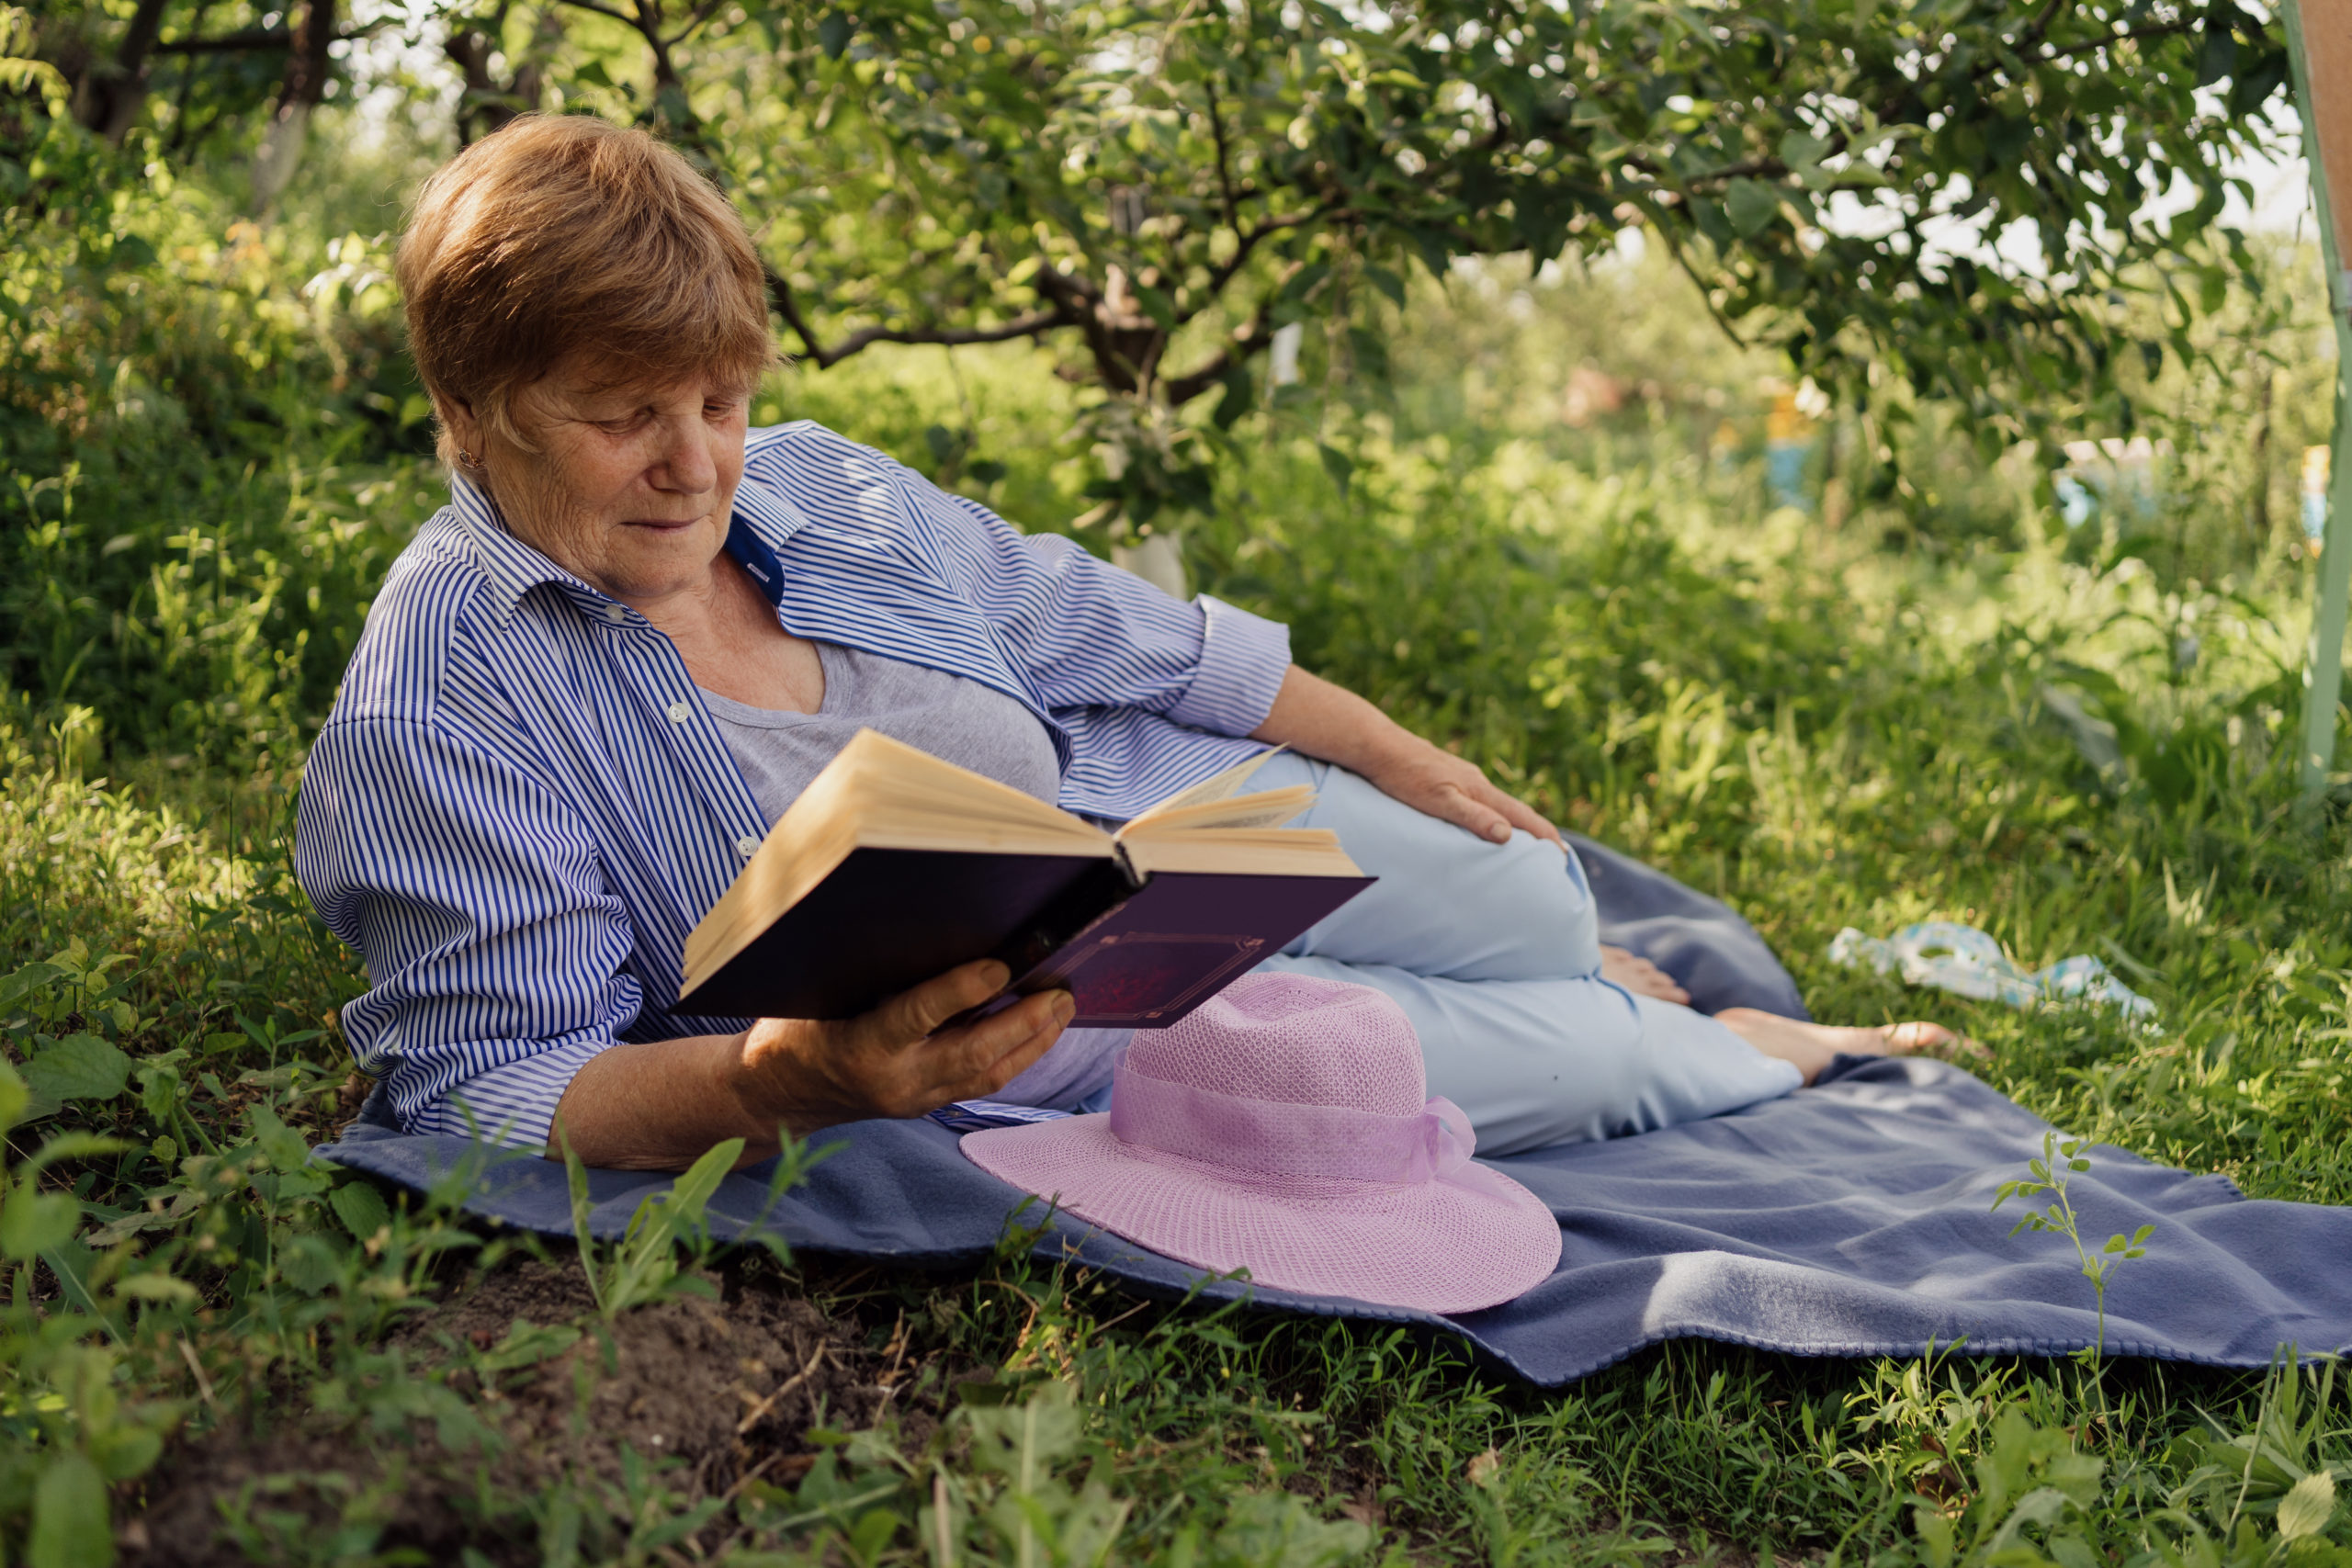 Woman lounging outside under a tree, reading a book.